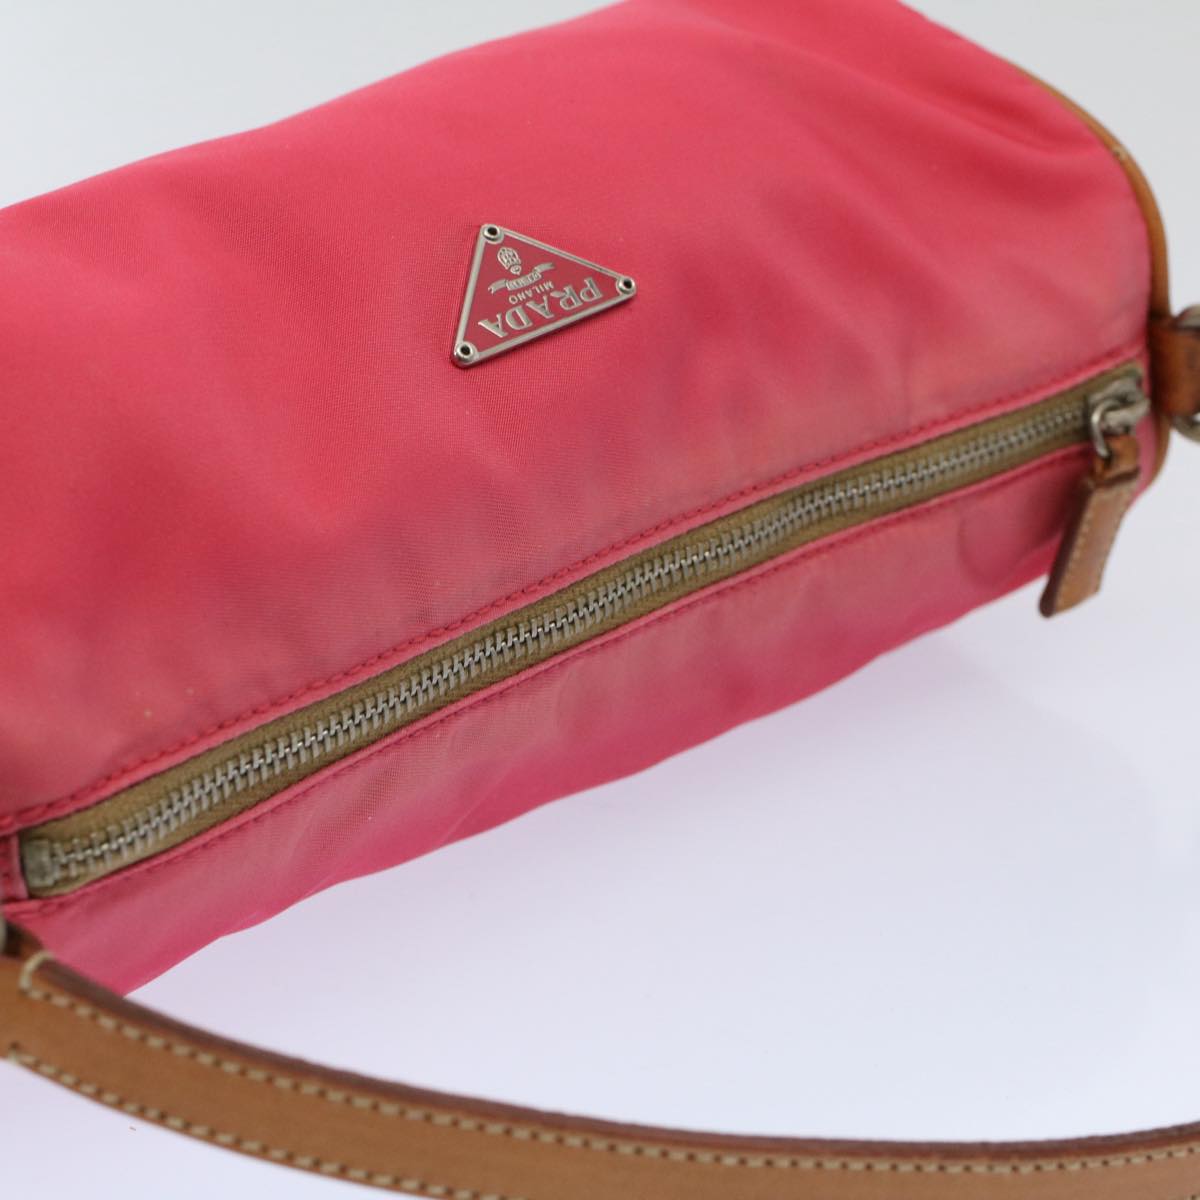 PRADA Accessory Pouch Nylon Pink Auth bs10180